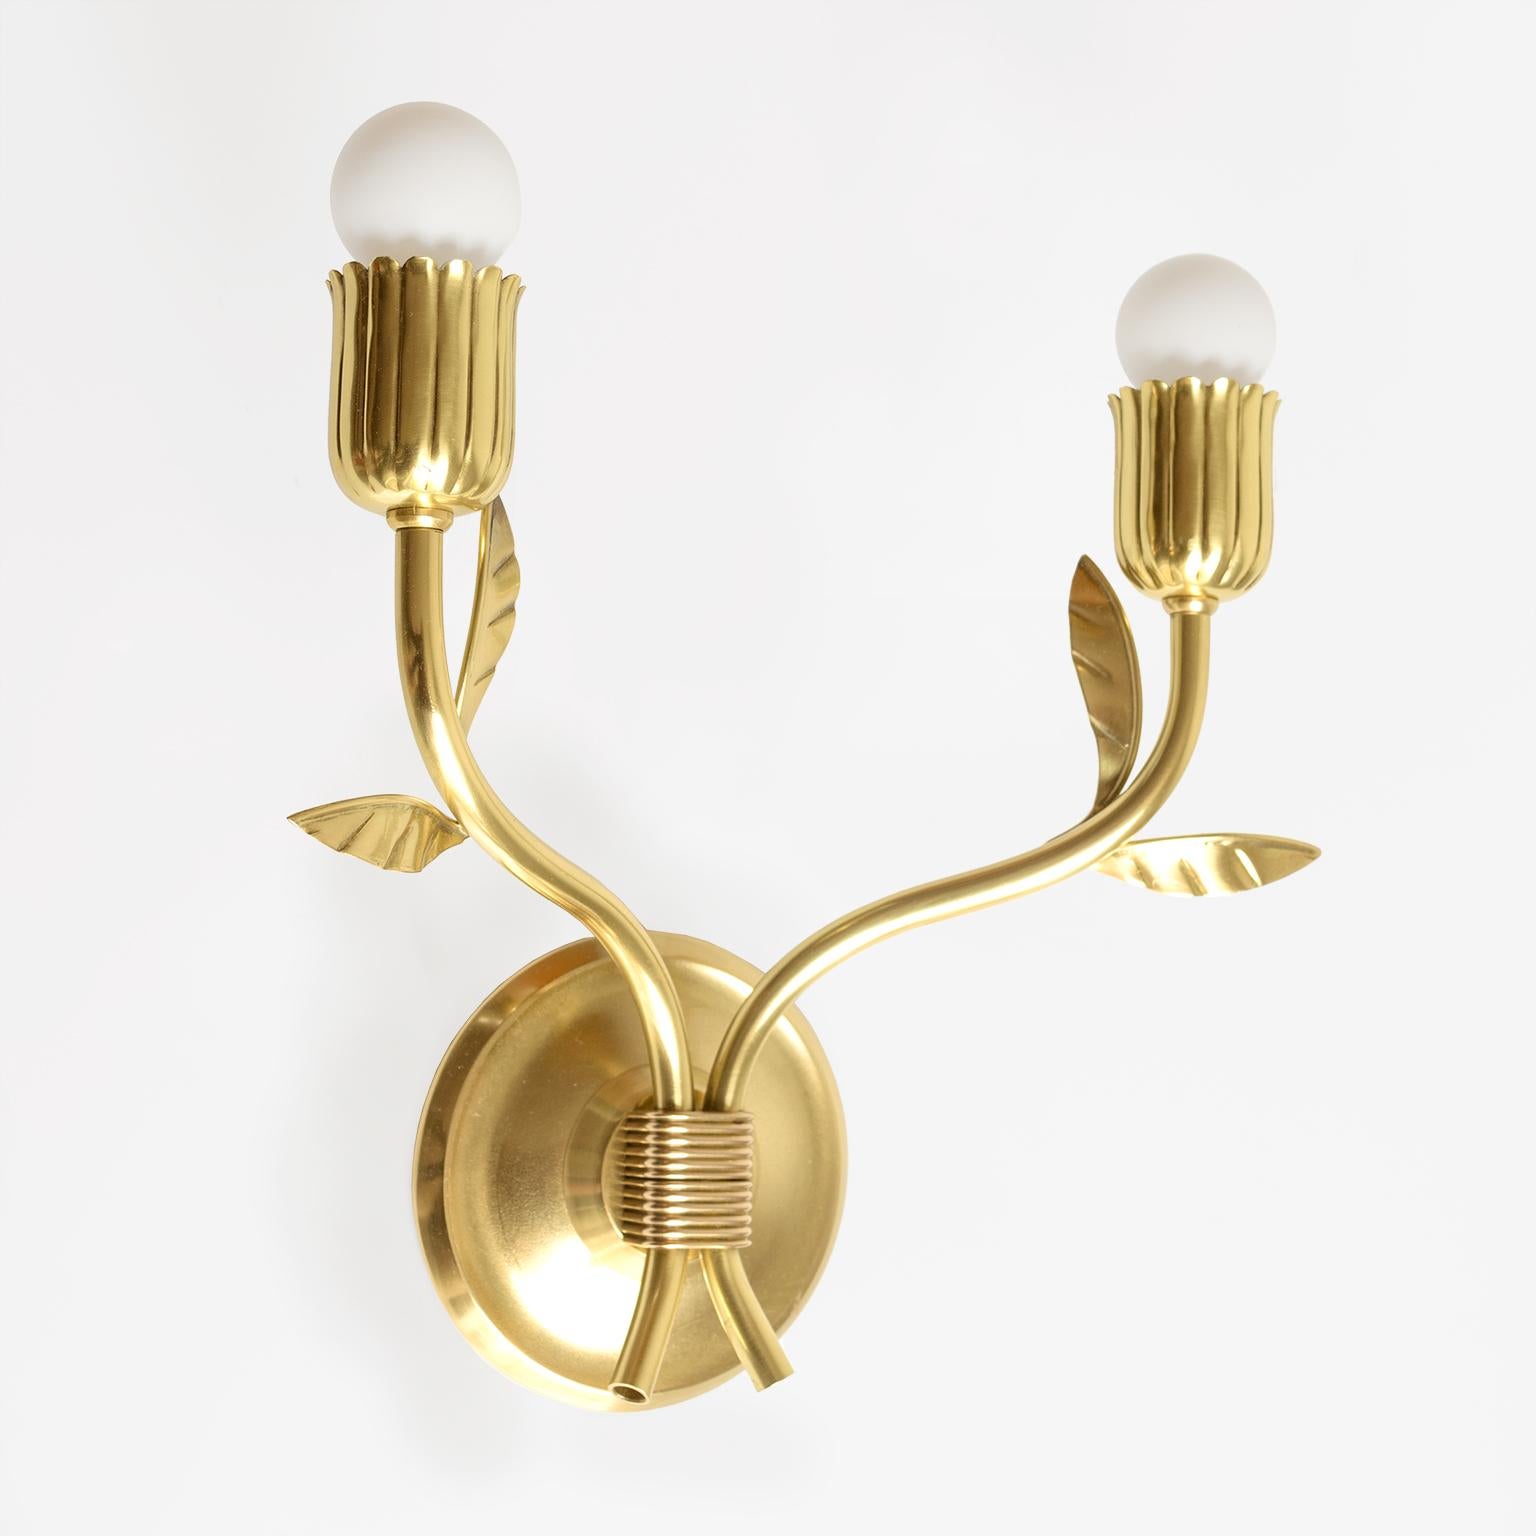 Pair of Scandinavian Modern Floral Double Arm Sconces in Brass 1